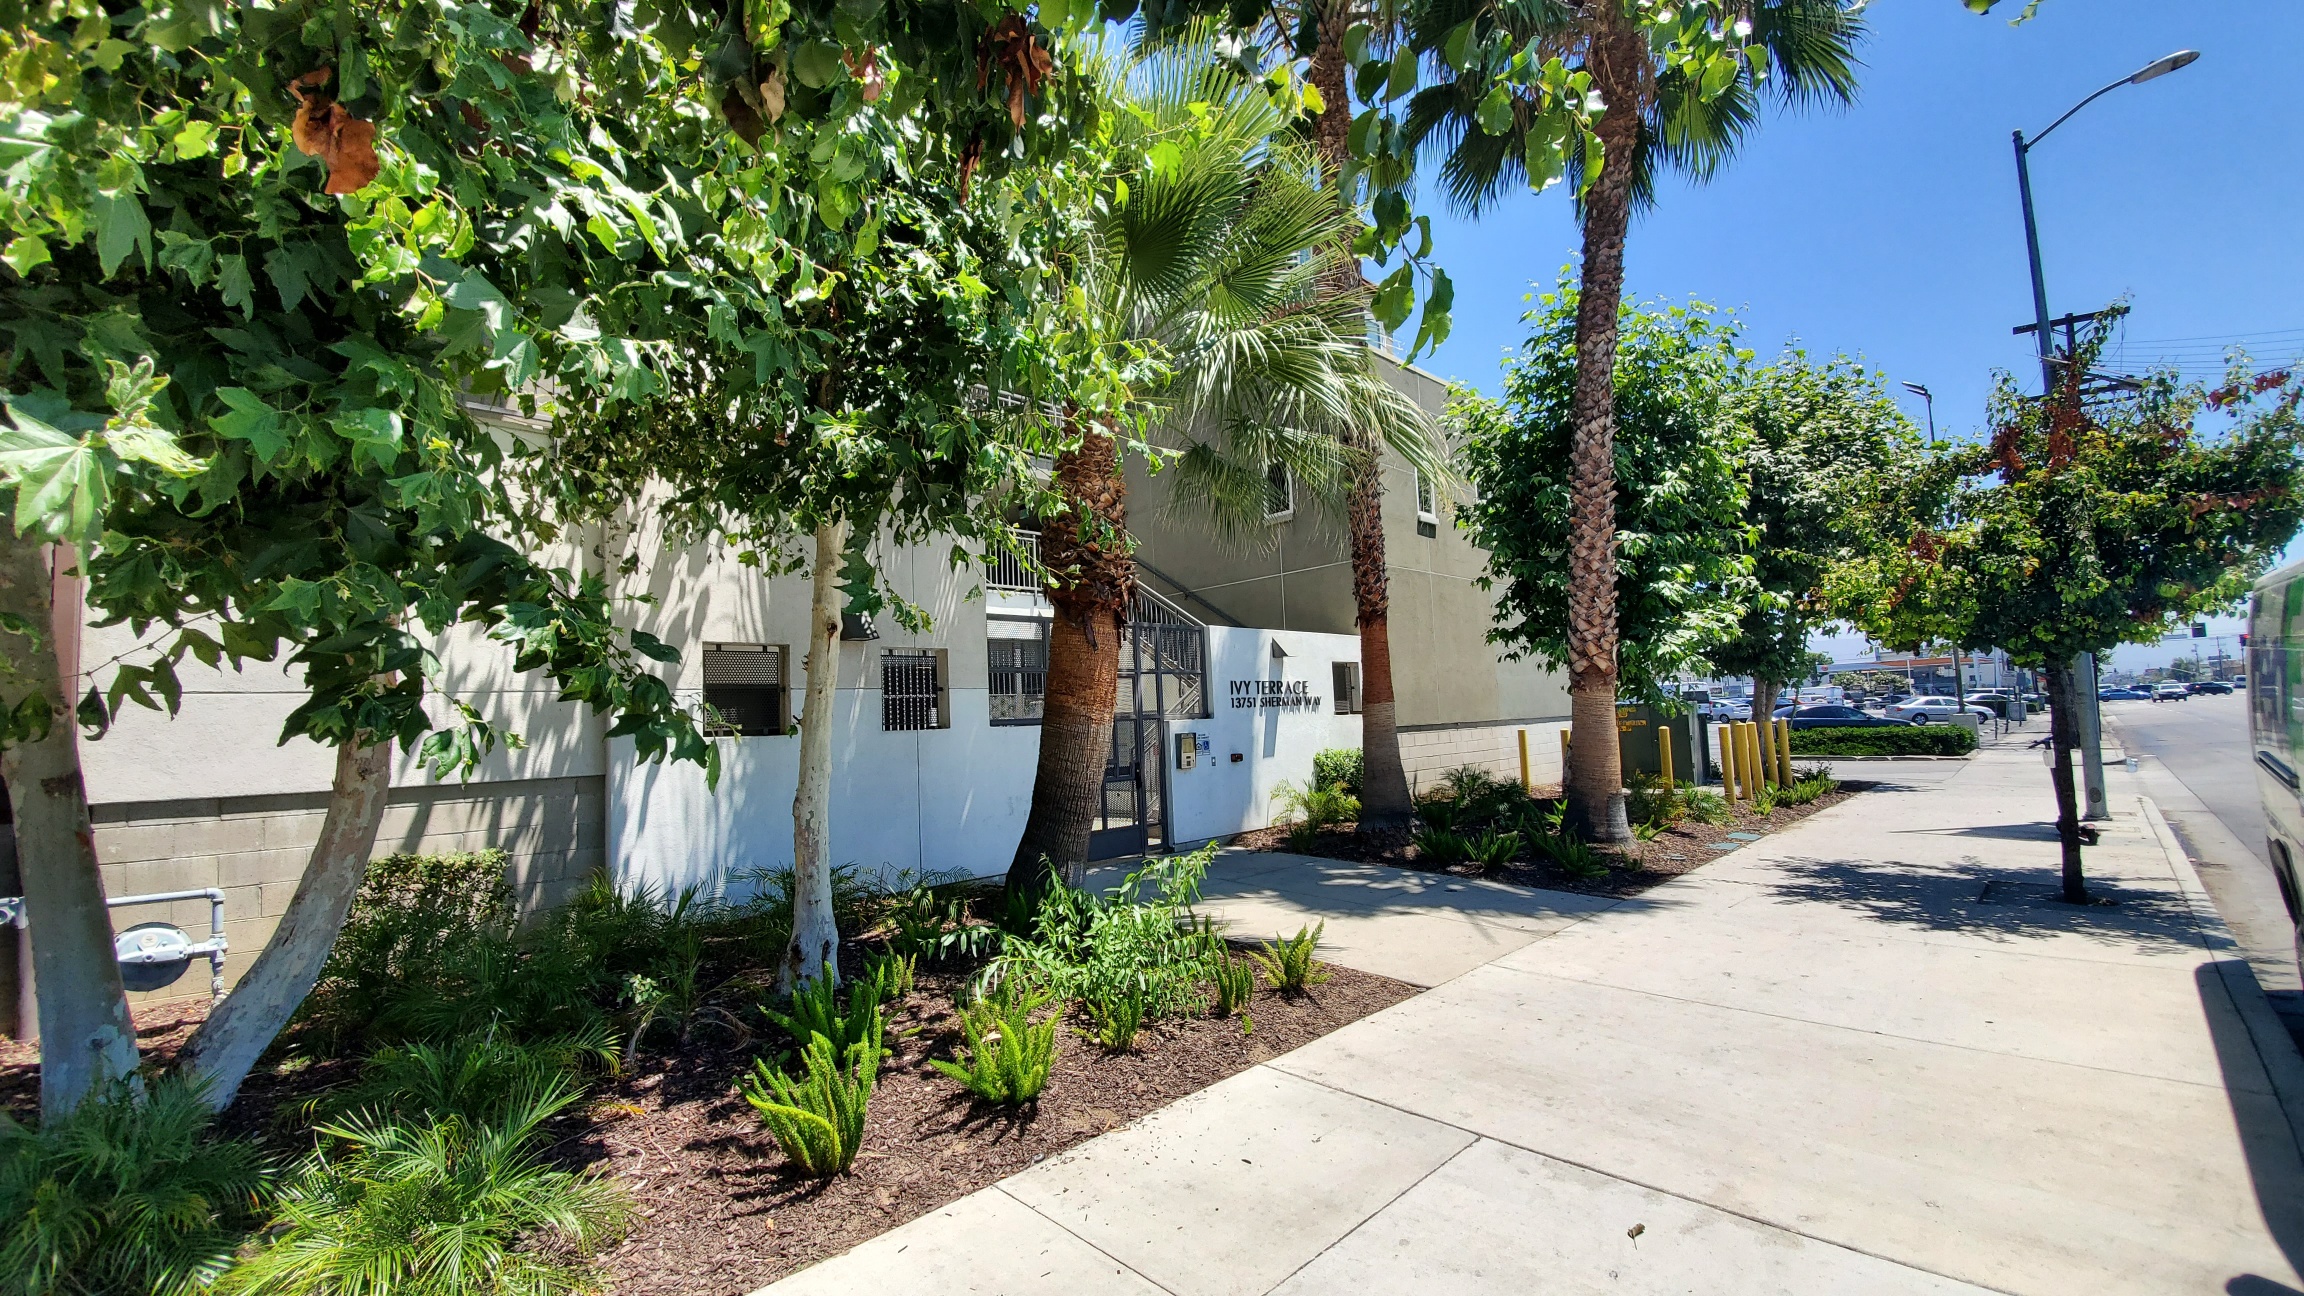 Front side view of a building complex. There is a small front lawn in front of the building that has a variety of plants and trees. Front of the building is gated and has a keypad for access. There is a upward staircase viewable with handle bars on both s